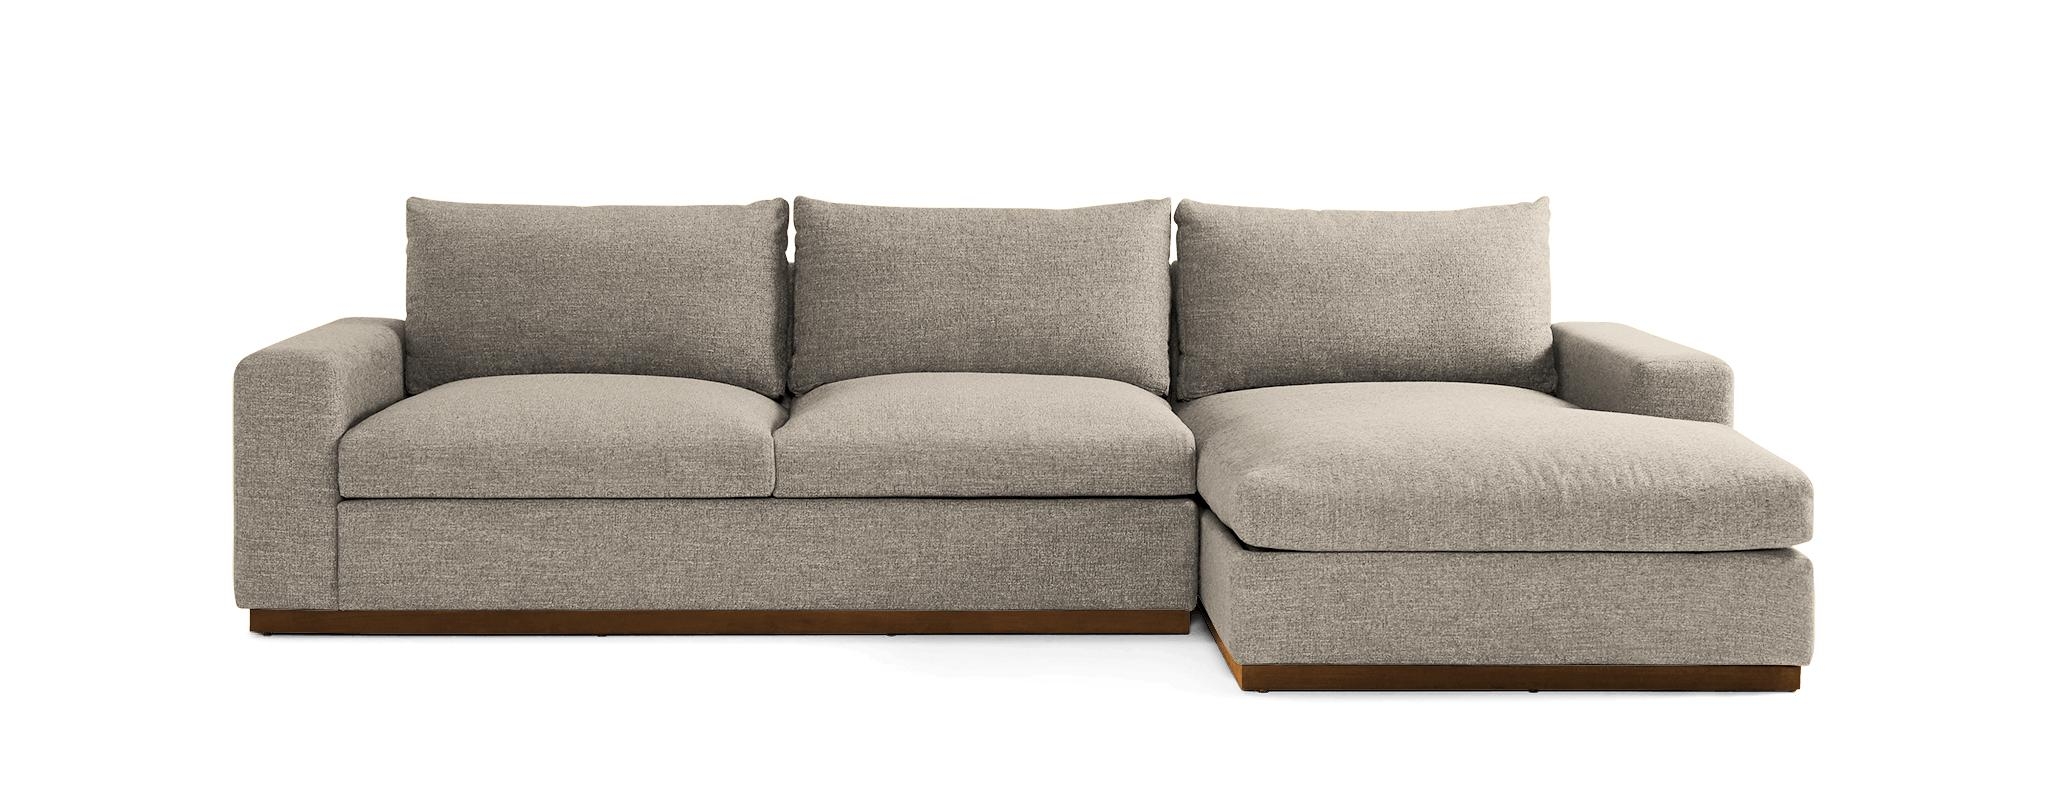 Beige/White Holt Mid Century Modern Sectional with Storage - Cody Sandstone - Mocha - Right - Image 0